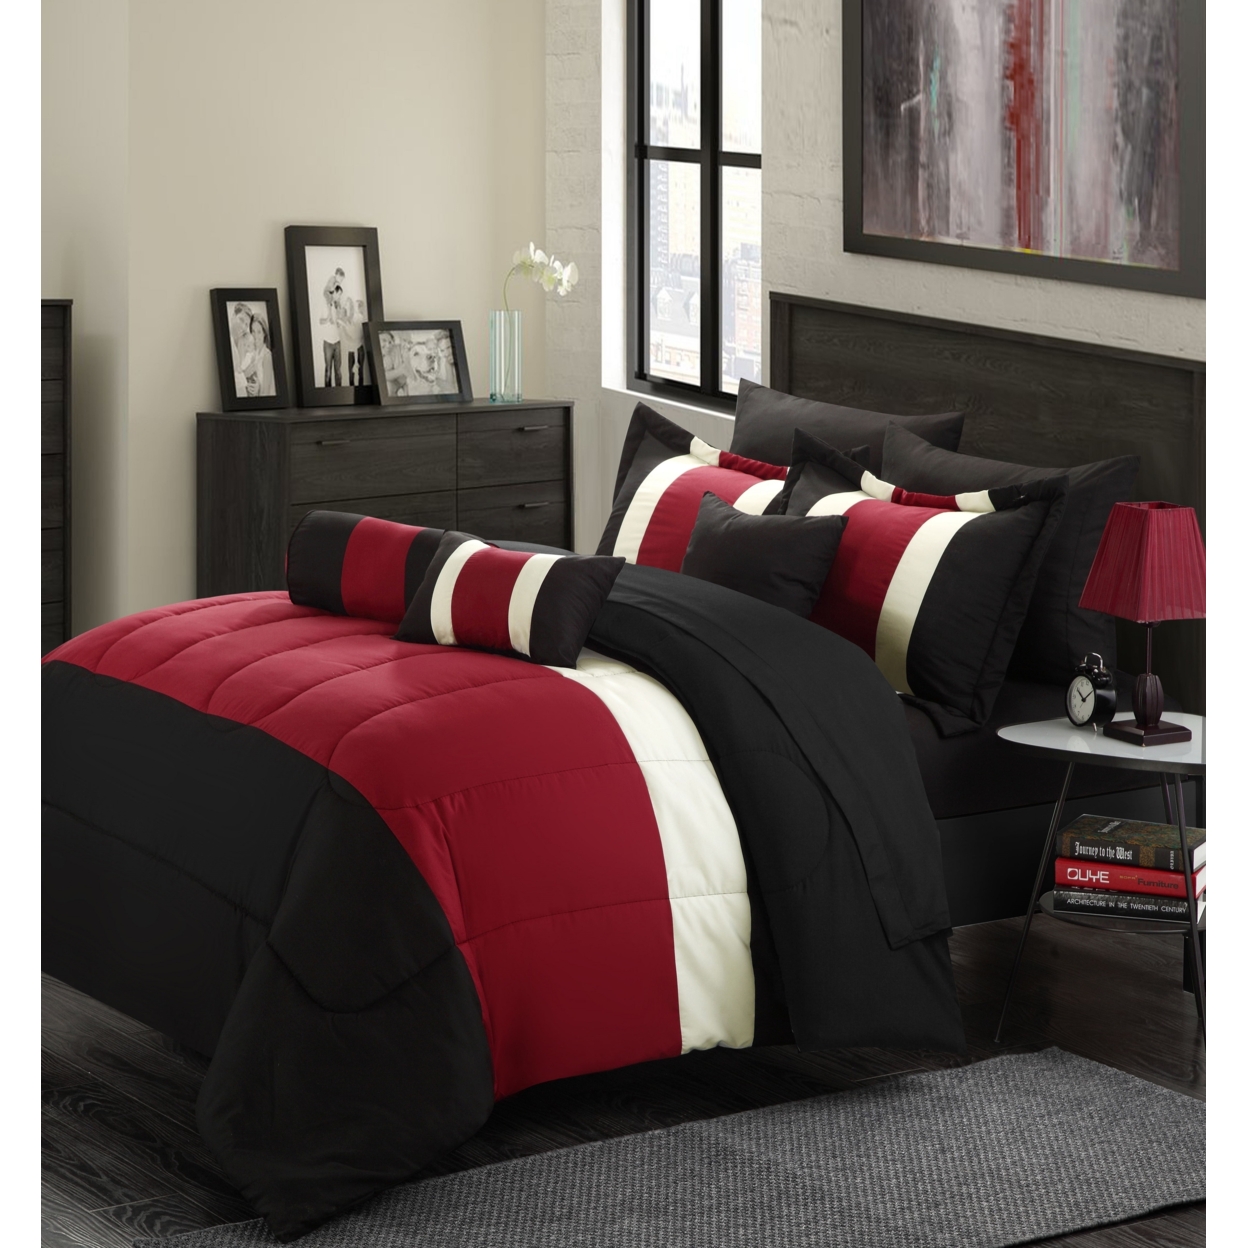 Sebastian 10-Piece Complete Bed In A Bag Bedding With Bed Sheet Set, Comforter Set, And Decorative Pillows - Black, Queen